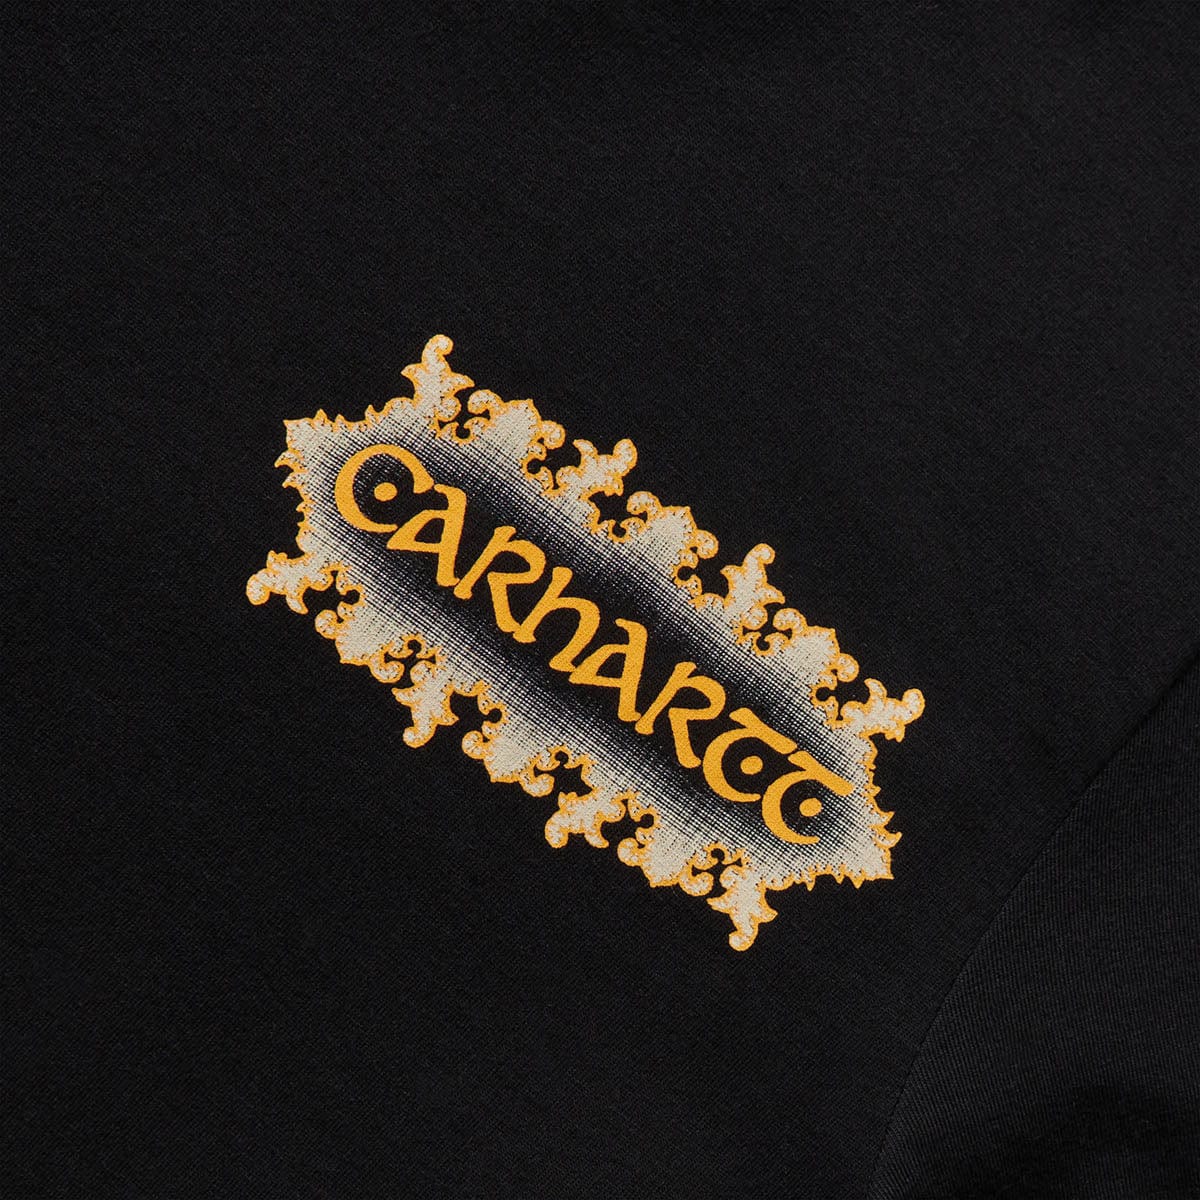 Carhartt WIP T-Shirts S/S SPACES T-SHIRT